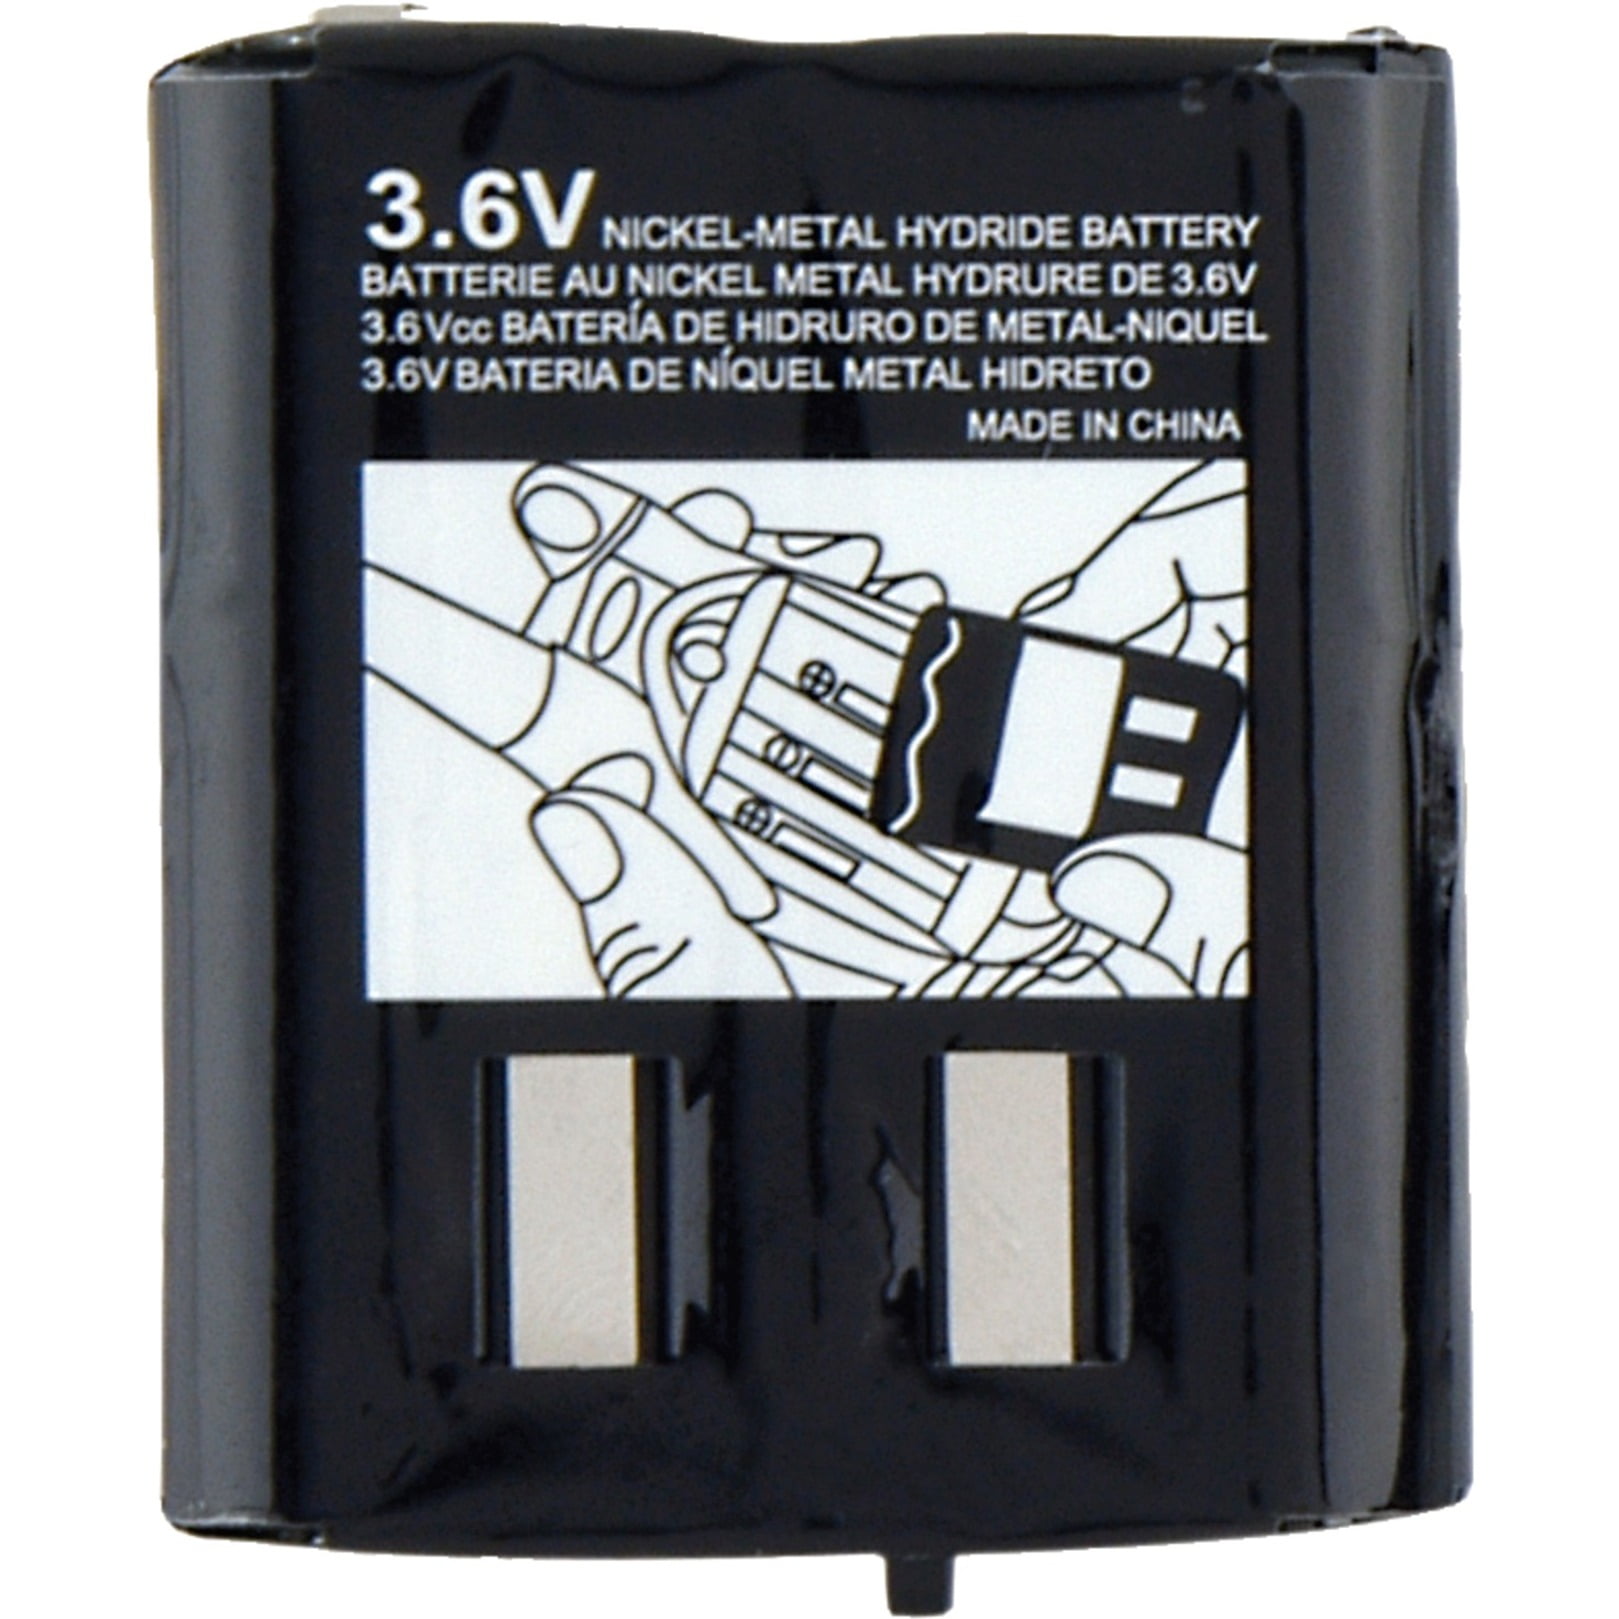 Two-Way Radio Battery EBFRS-KEBT071 Replaces KEBT071B FRS-4002A 53615 USA SHIP 